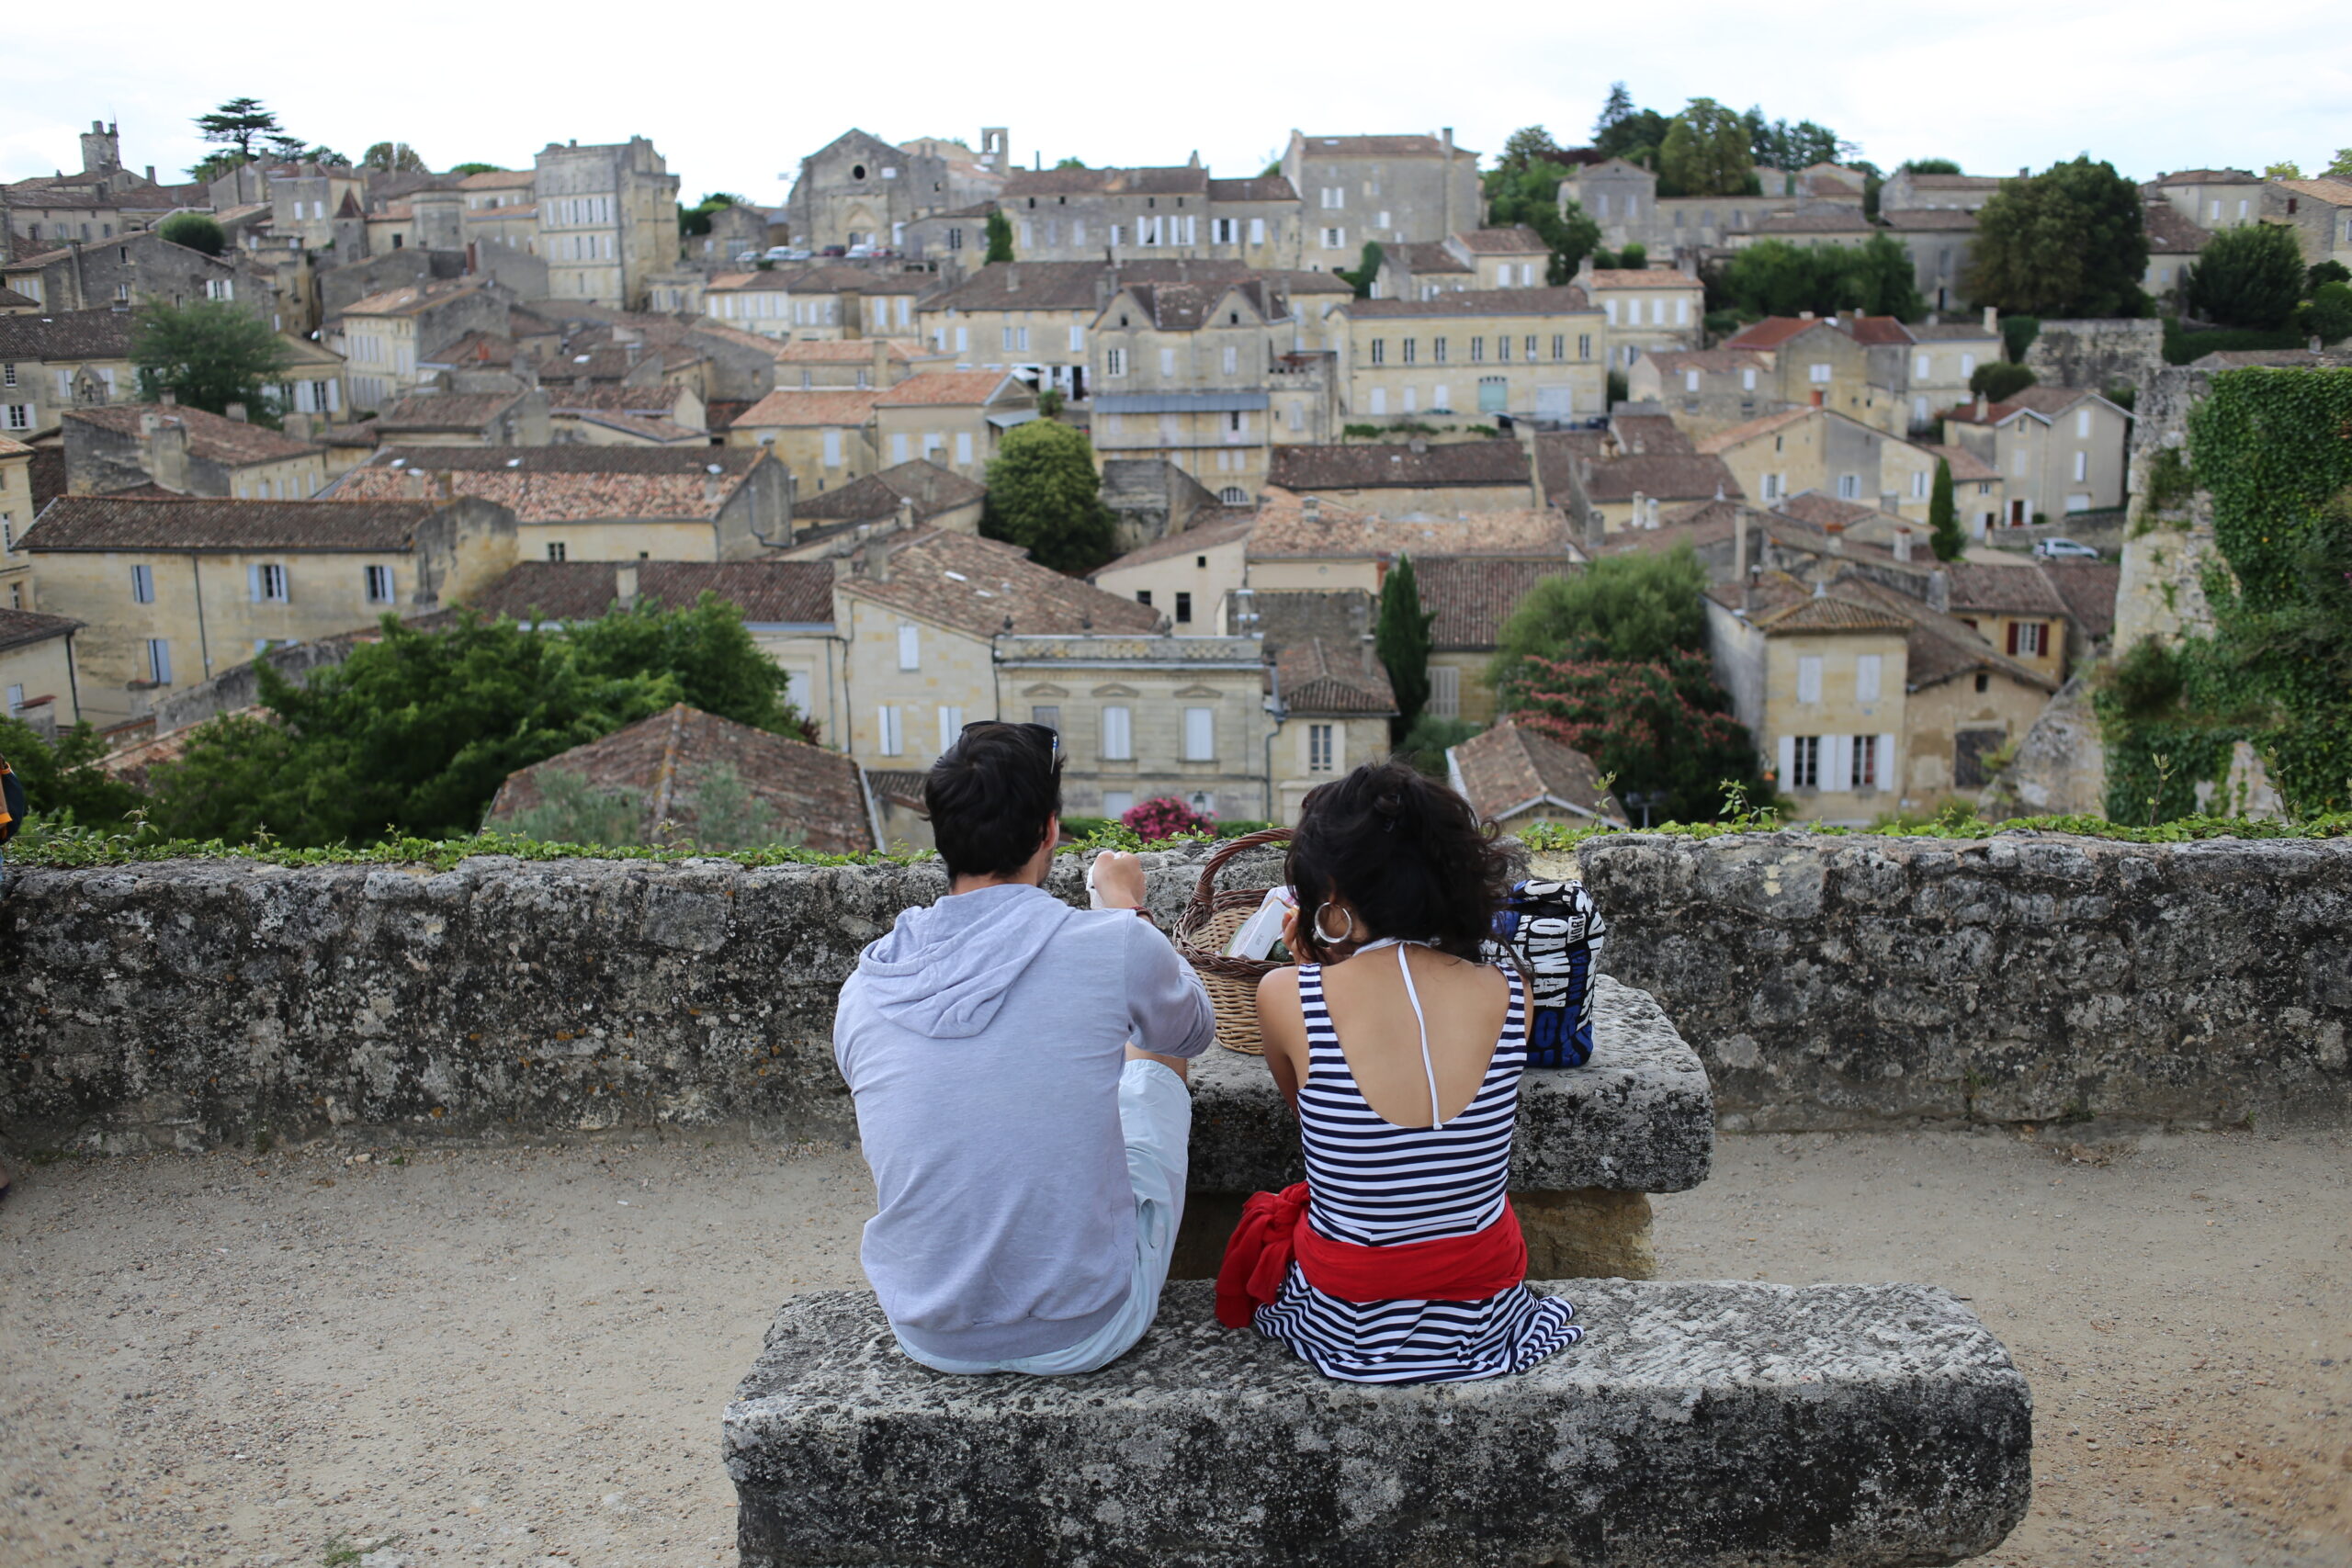 Saint-Émilion, France, is all about wine: : growing grapes, wine-making, wine-trading and wine drinking